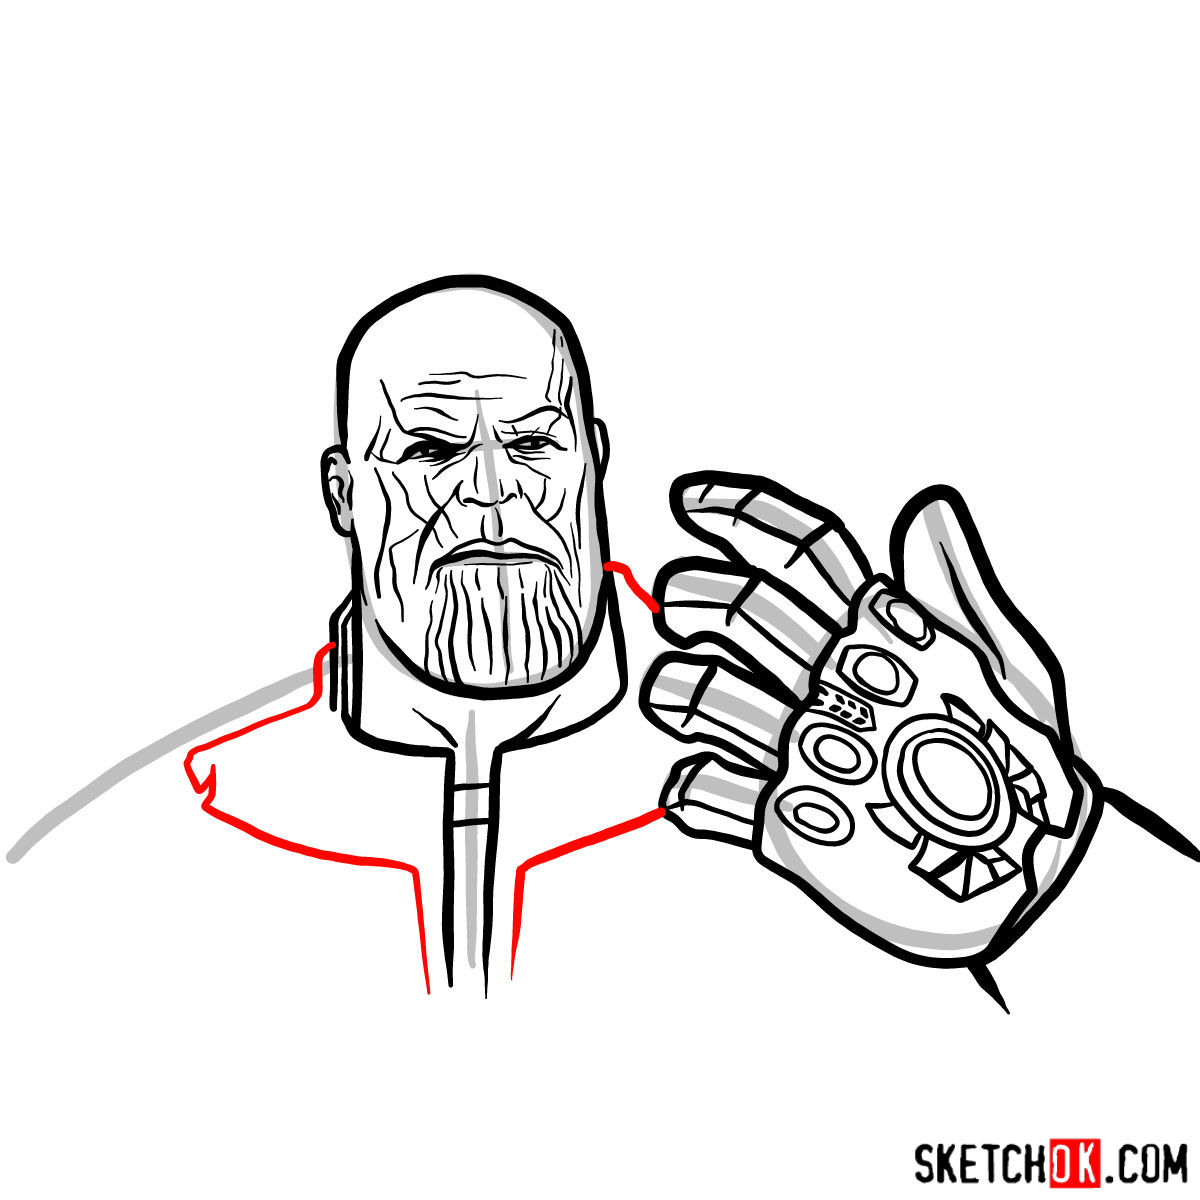 How to draw Thanos from the Avengers: Infinity War 2018 film - step 13